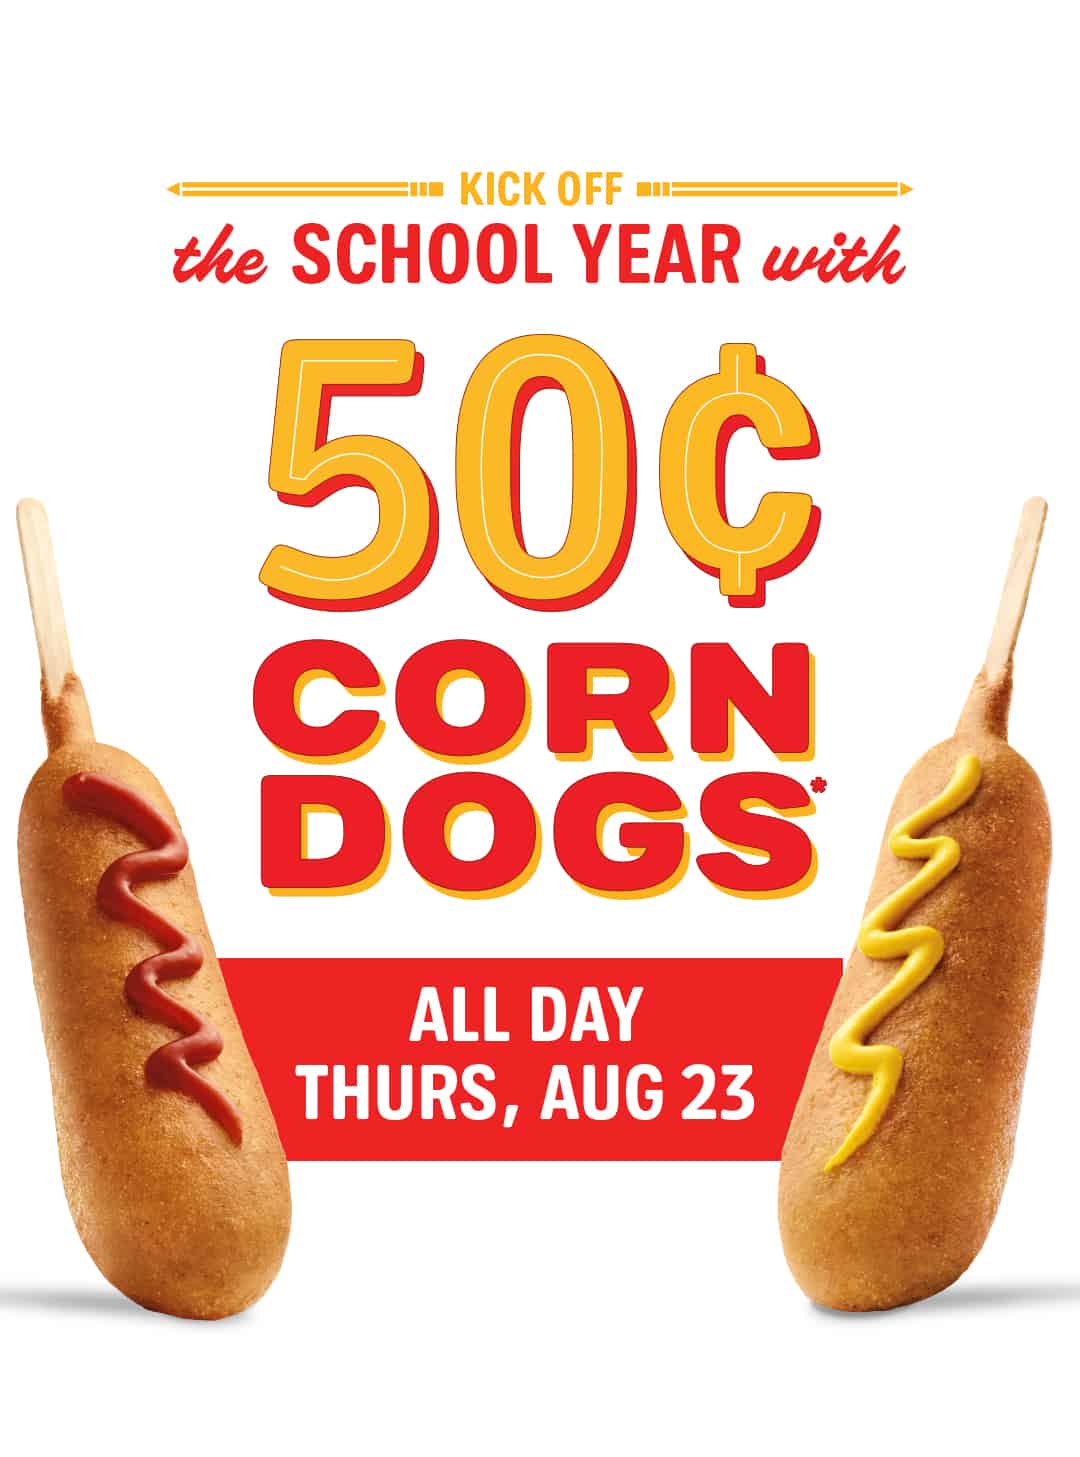 Sonic Drive In: $0.50 Corn Dogs All Day